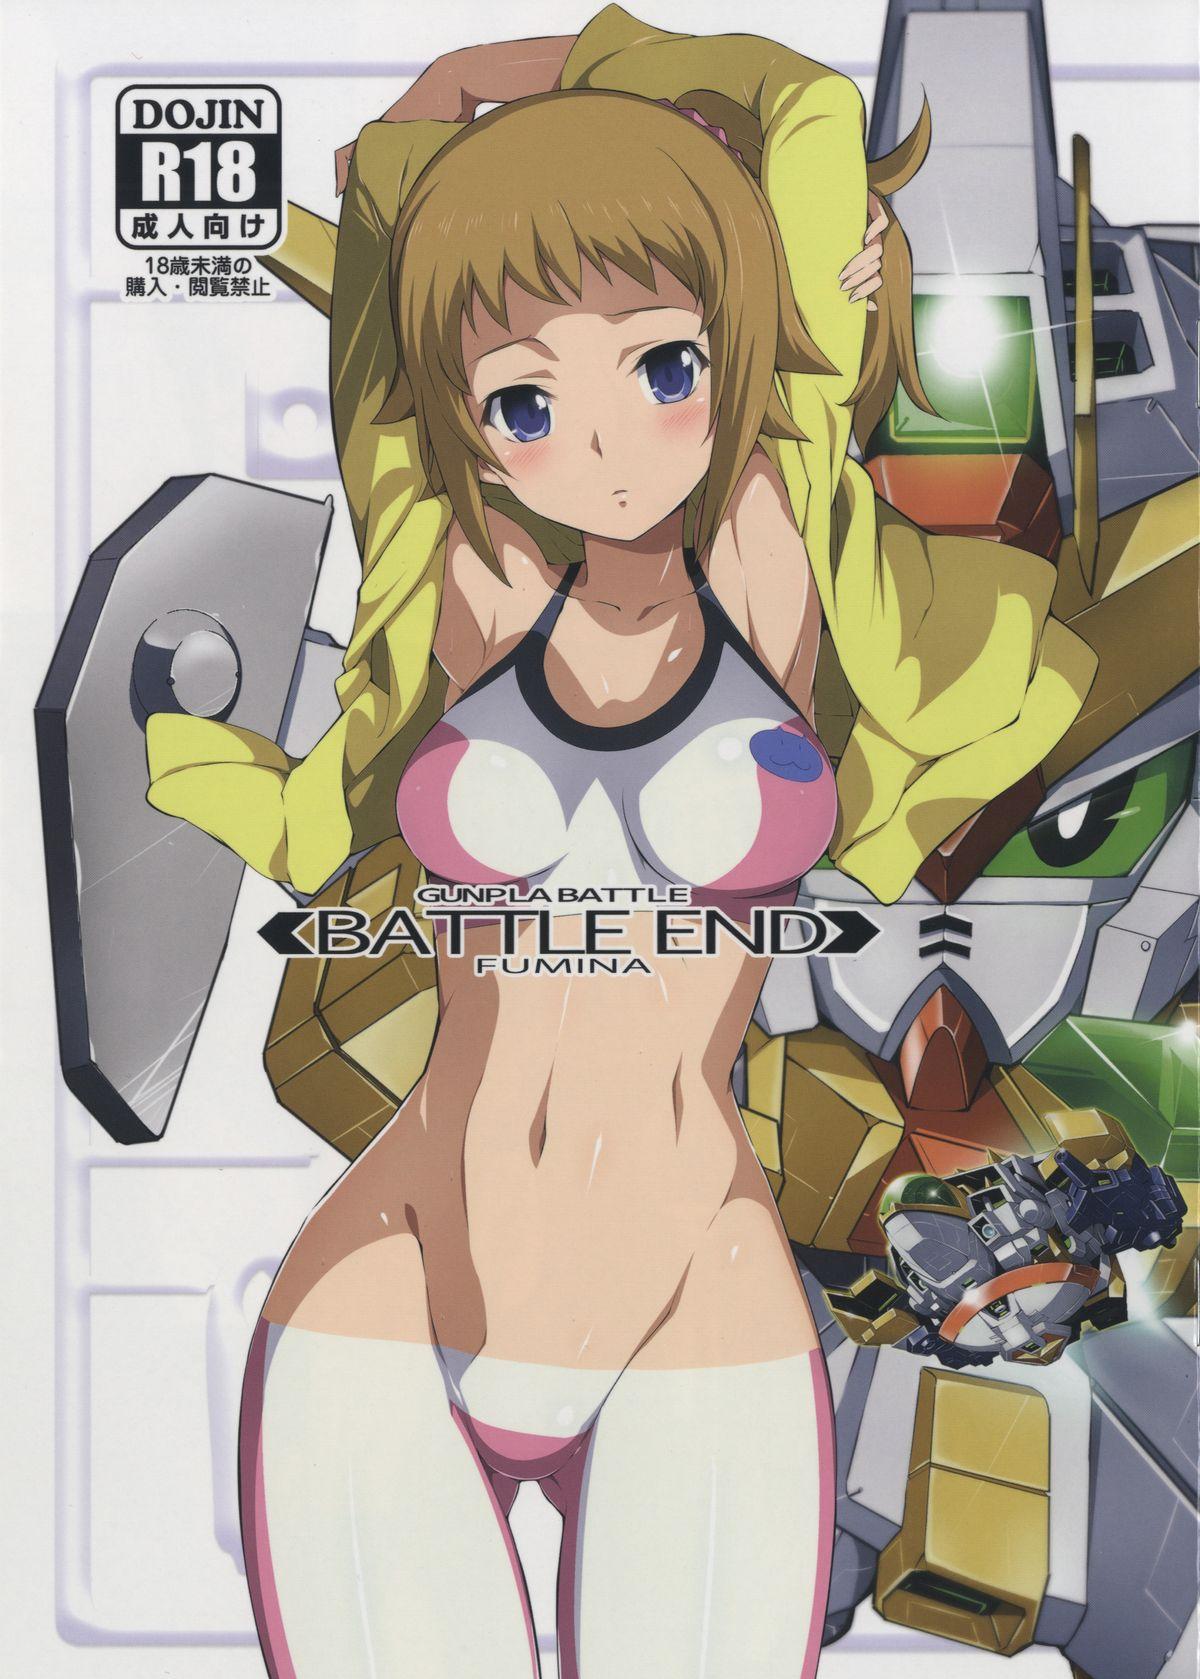 Blow Job BATTLE END FUMINA - Gundam build fighters try Tanned - Page 1